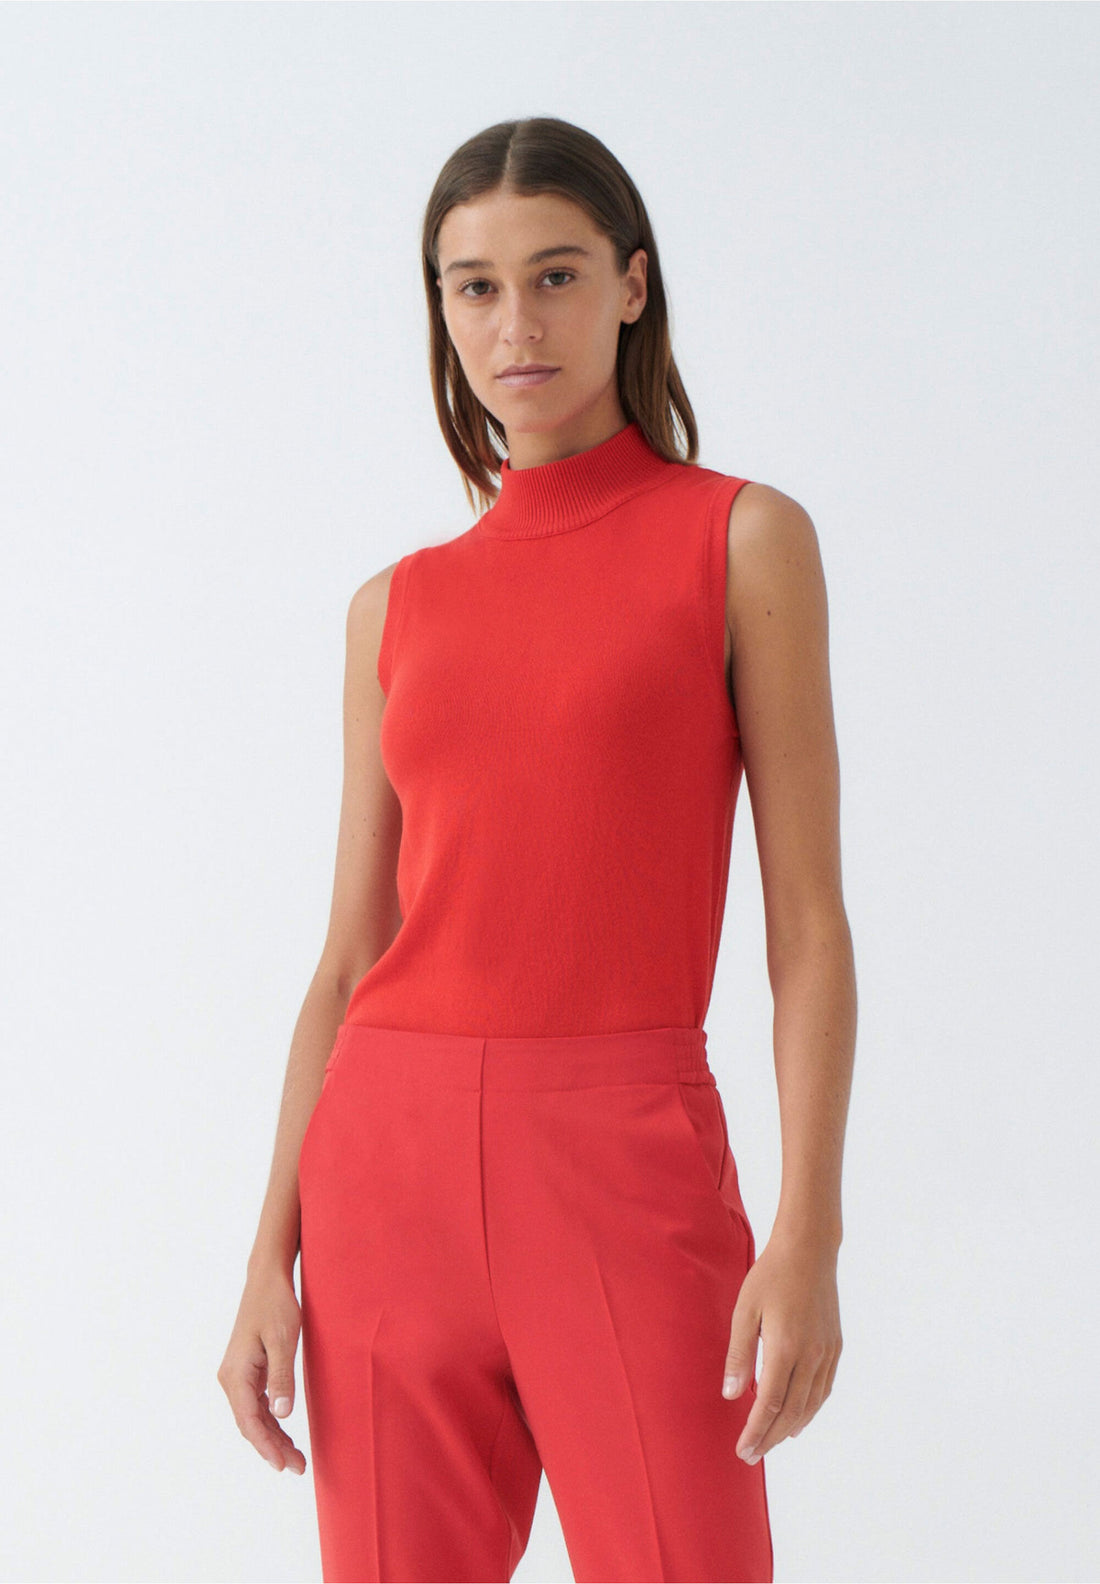 Power Red Sleeveless Top With High Neck_31081053_0523_01